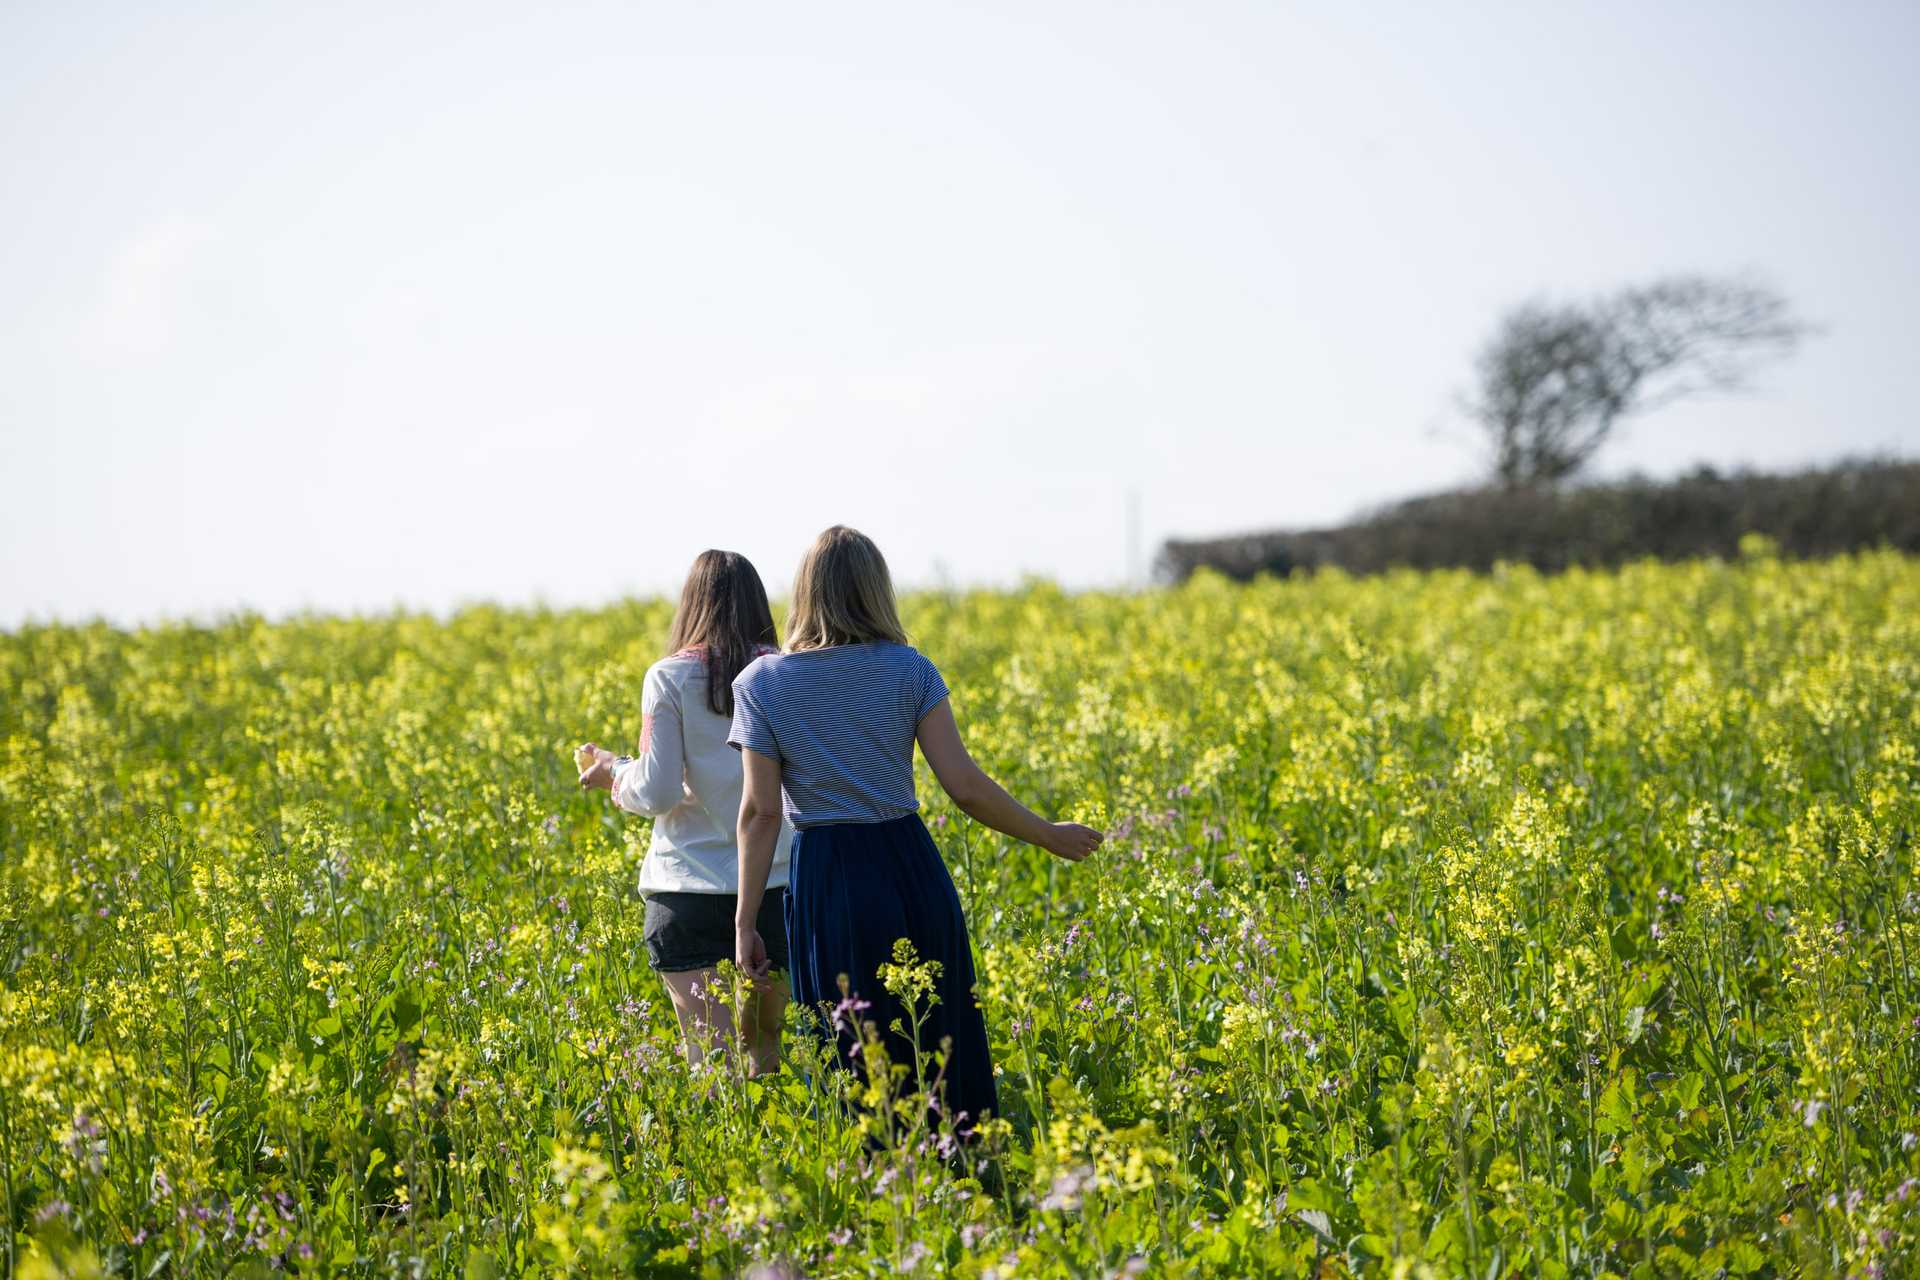 Two women walk through a field of yellow flowers in the Calamansac Estate on a sunny day